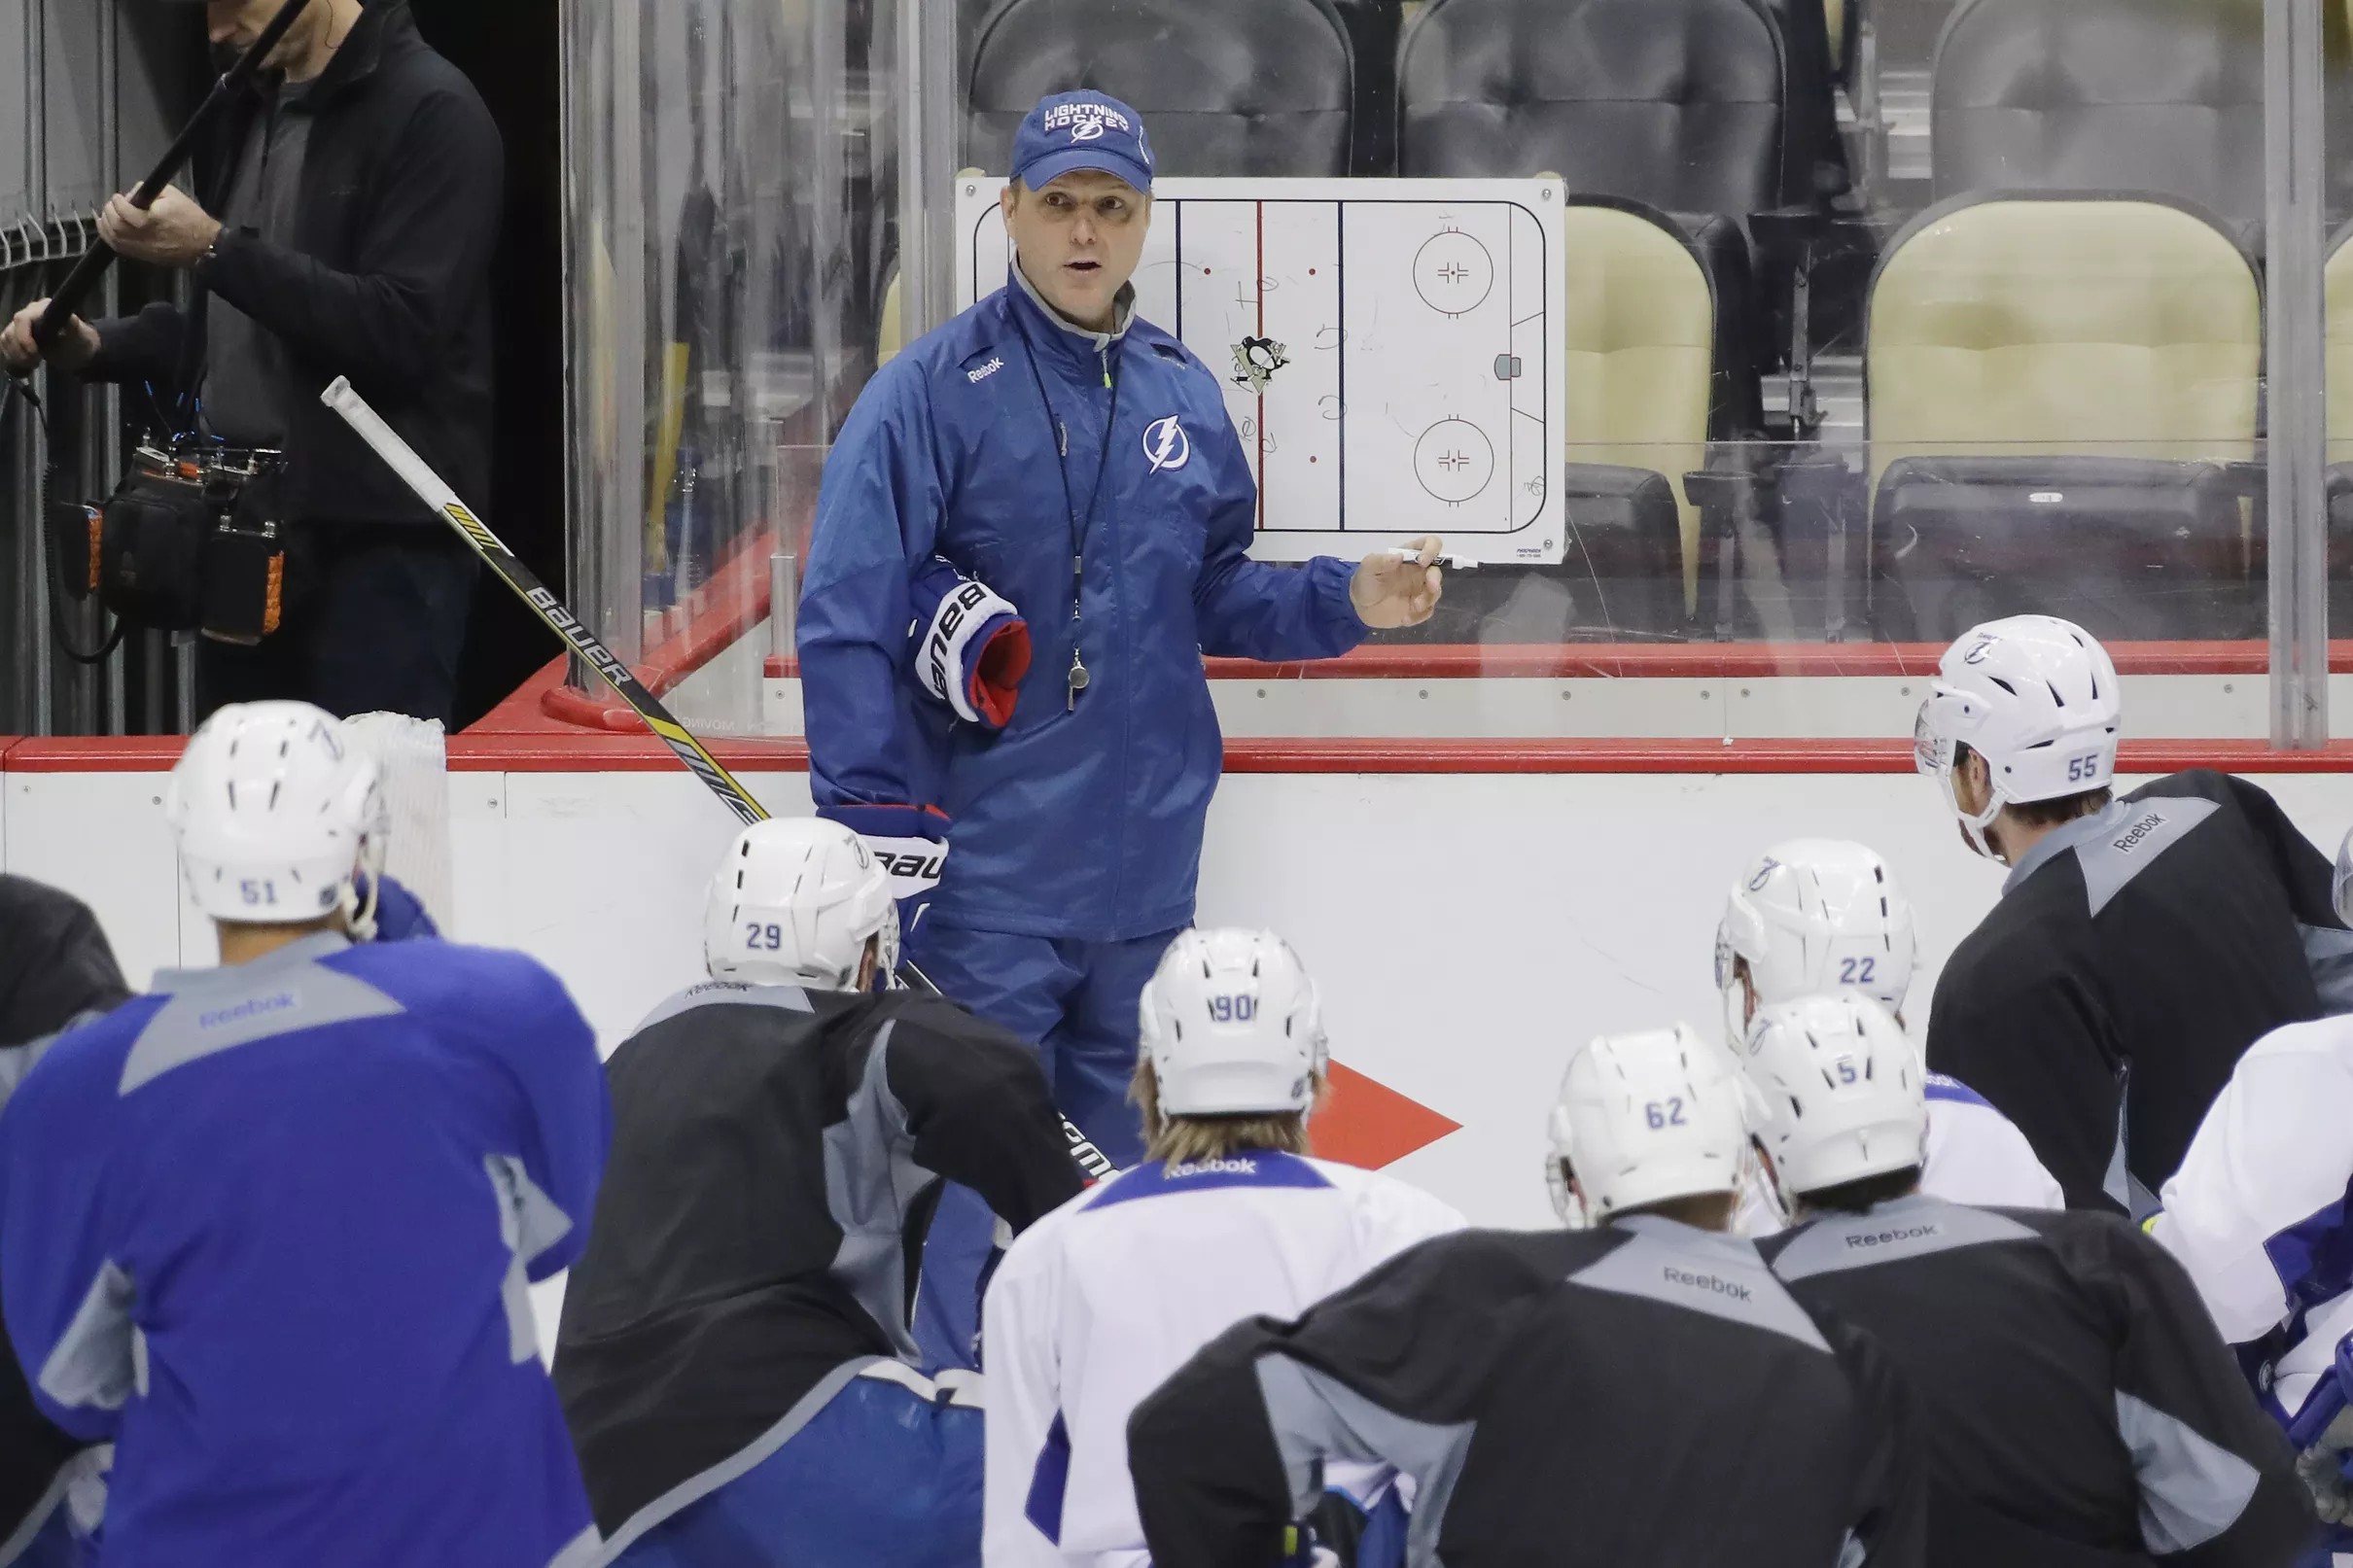 Quick Strikes The search for the Tampa Bay Lightning’s coaching staff